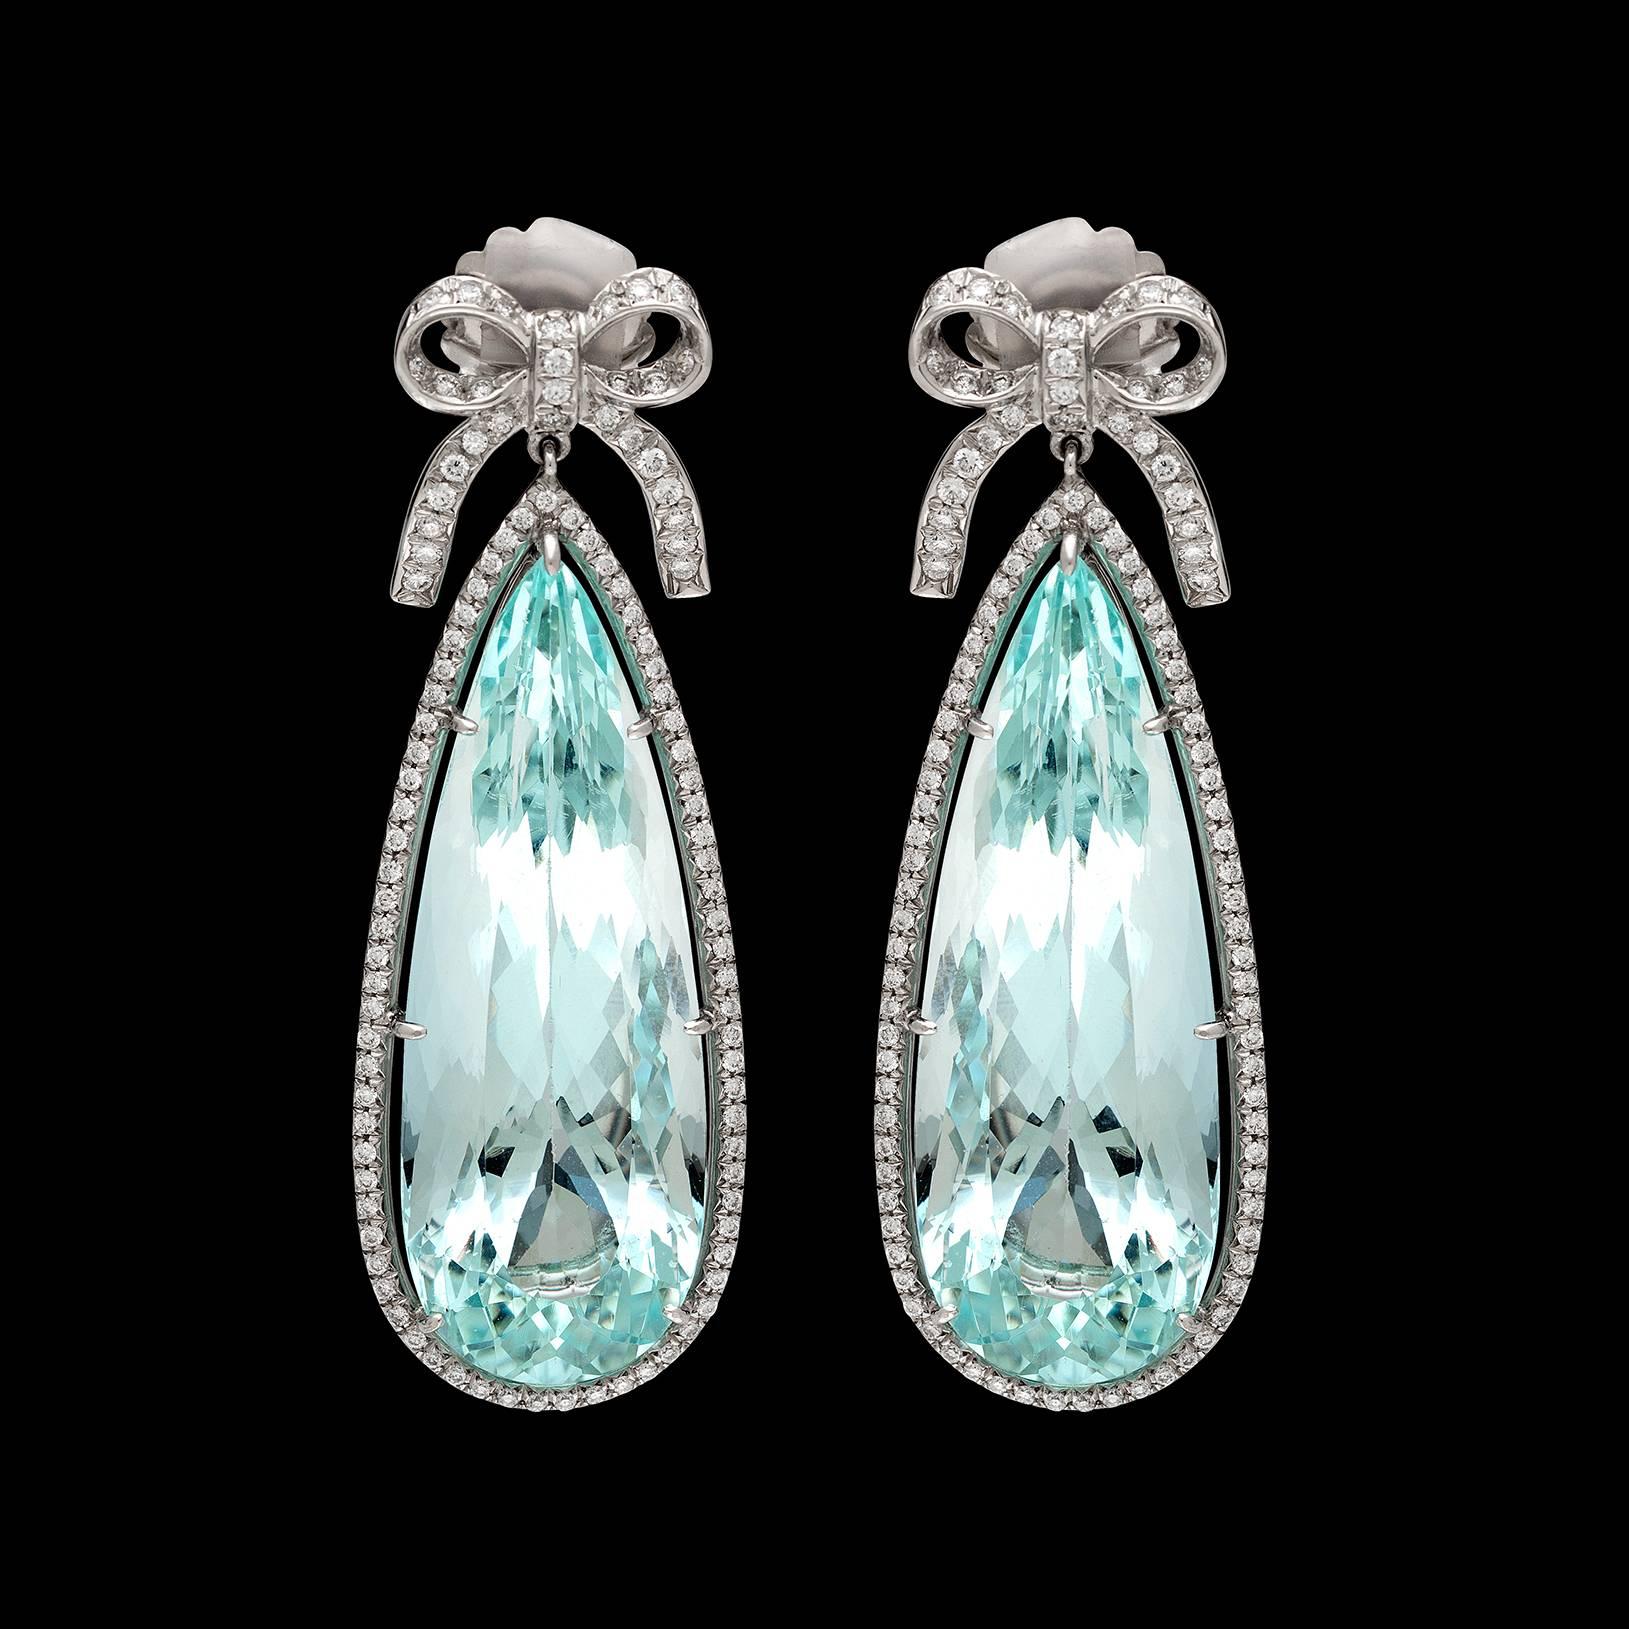 These vibrant platinum earrings are designed with two fine pear-shaped aquamarines, weighing 34.37 and 33.52 carats, surmounted by bow motif tops, framed with 208 round brilliant-cut diamonds, weighing in total an estimated 1.29 carats. The drop